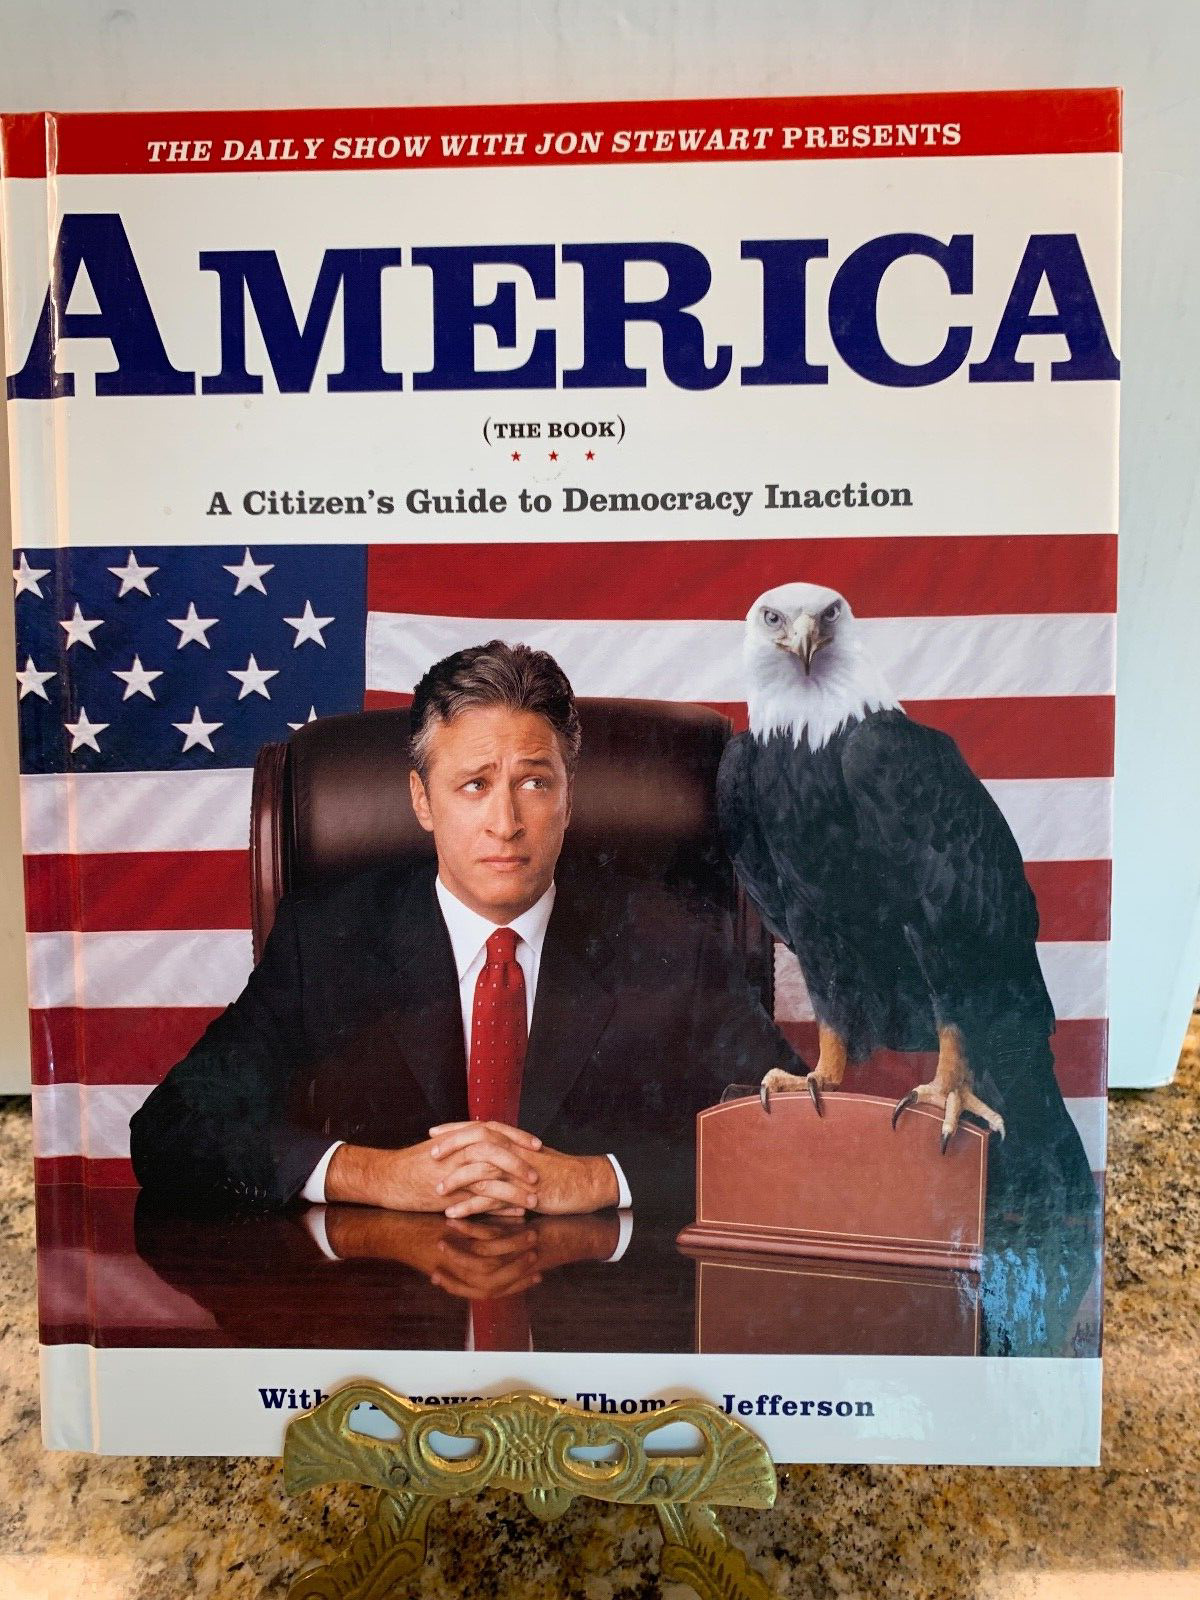 The Daily Show with Jon Stewart Presents America A Citizen\'s Guide To Democracy